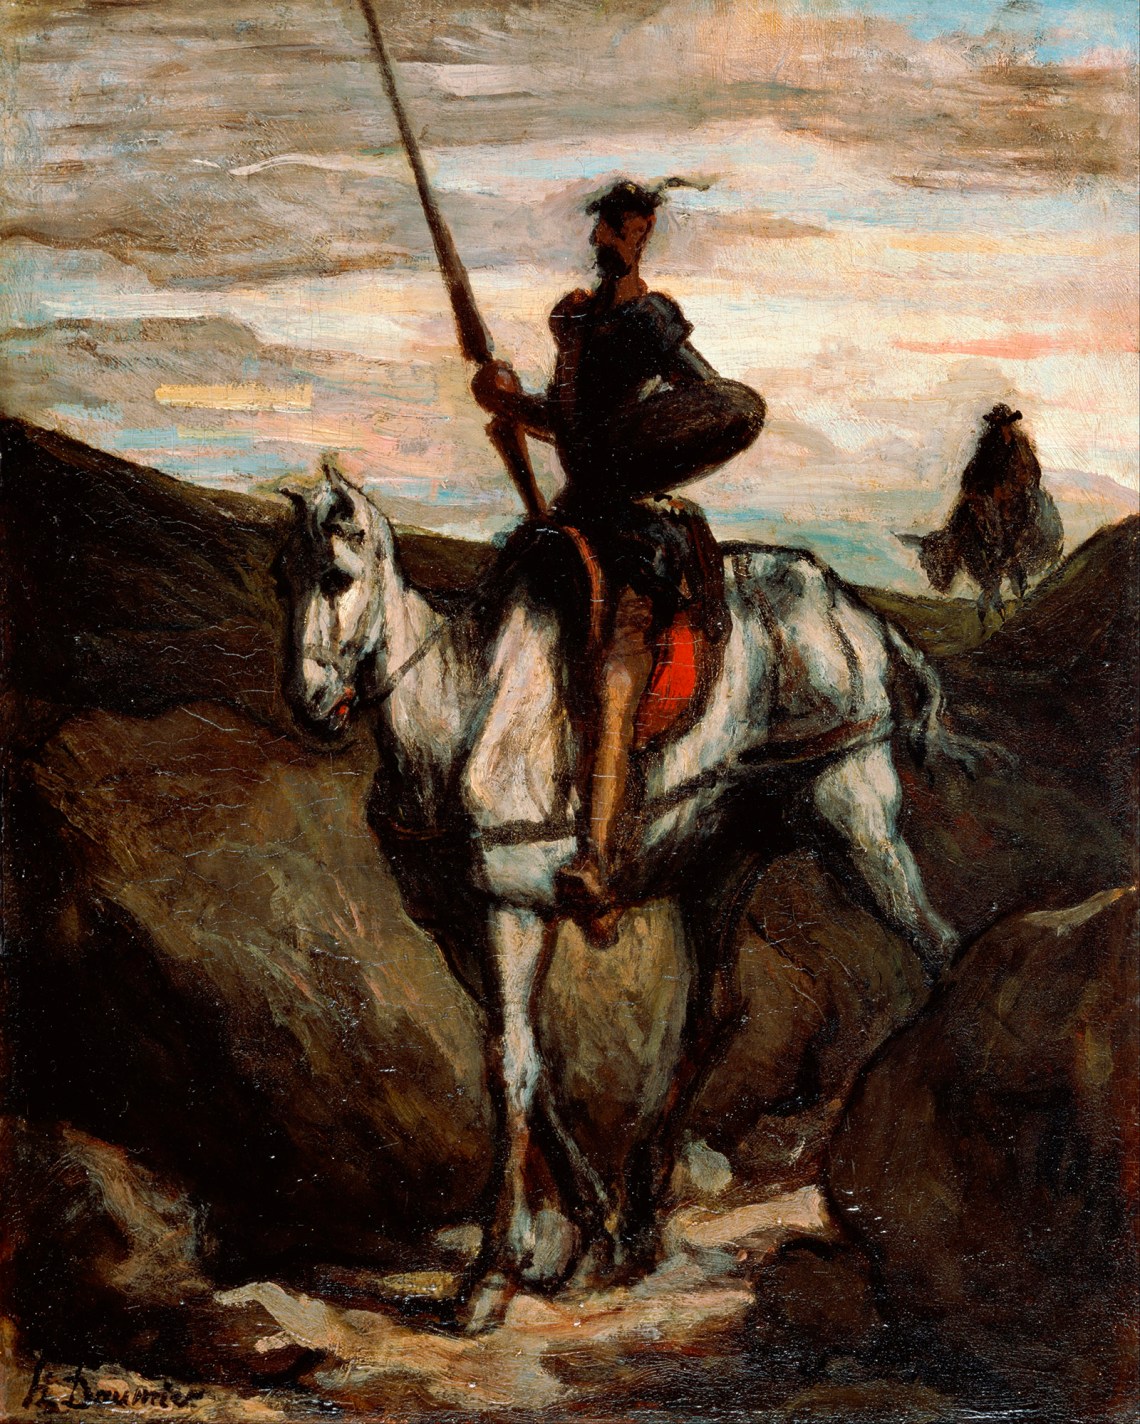 Don Quixote in the Mountains; painting by Honoré Daumier